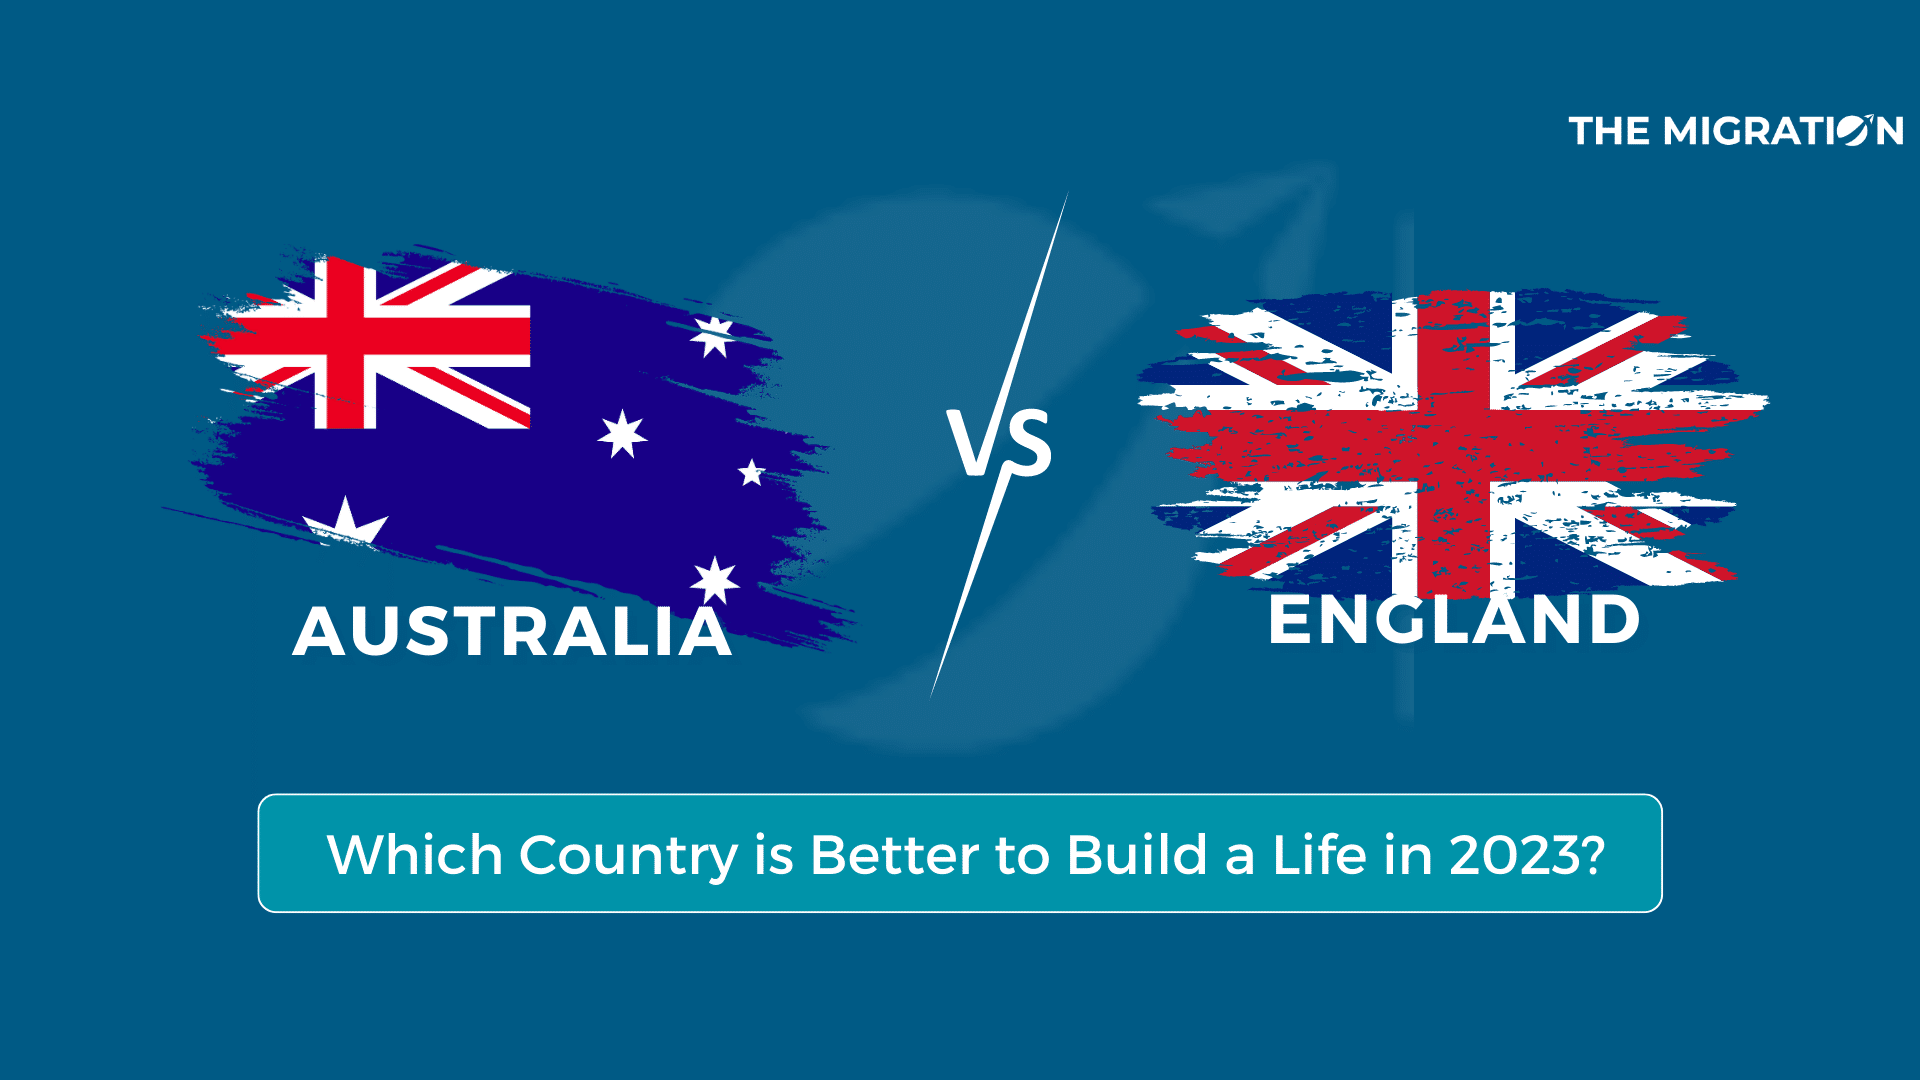 Australia vs England! Which country is better to build a life in 2023?